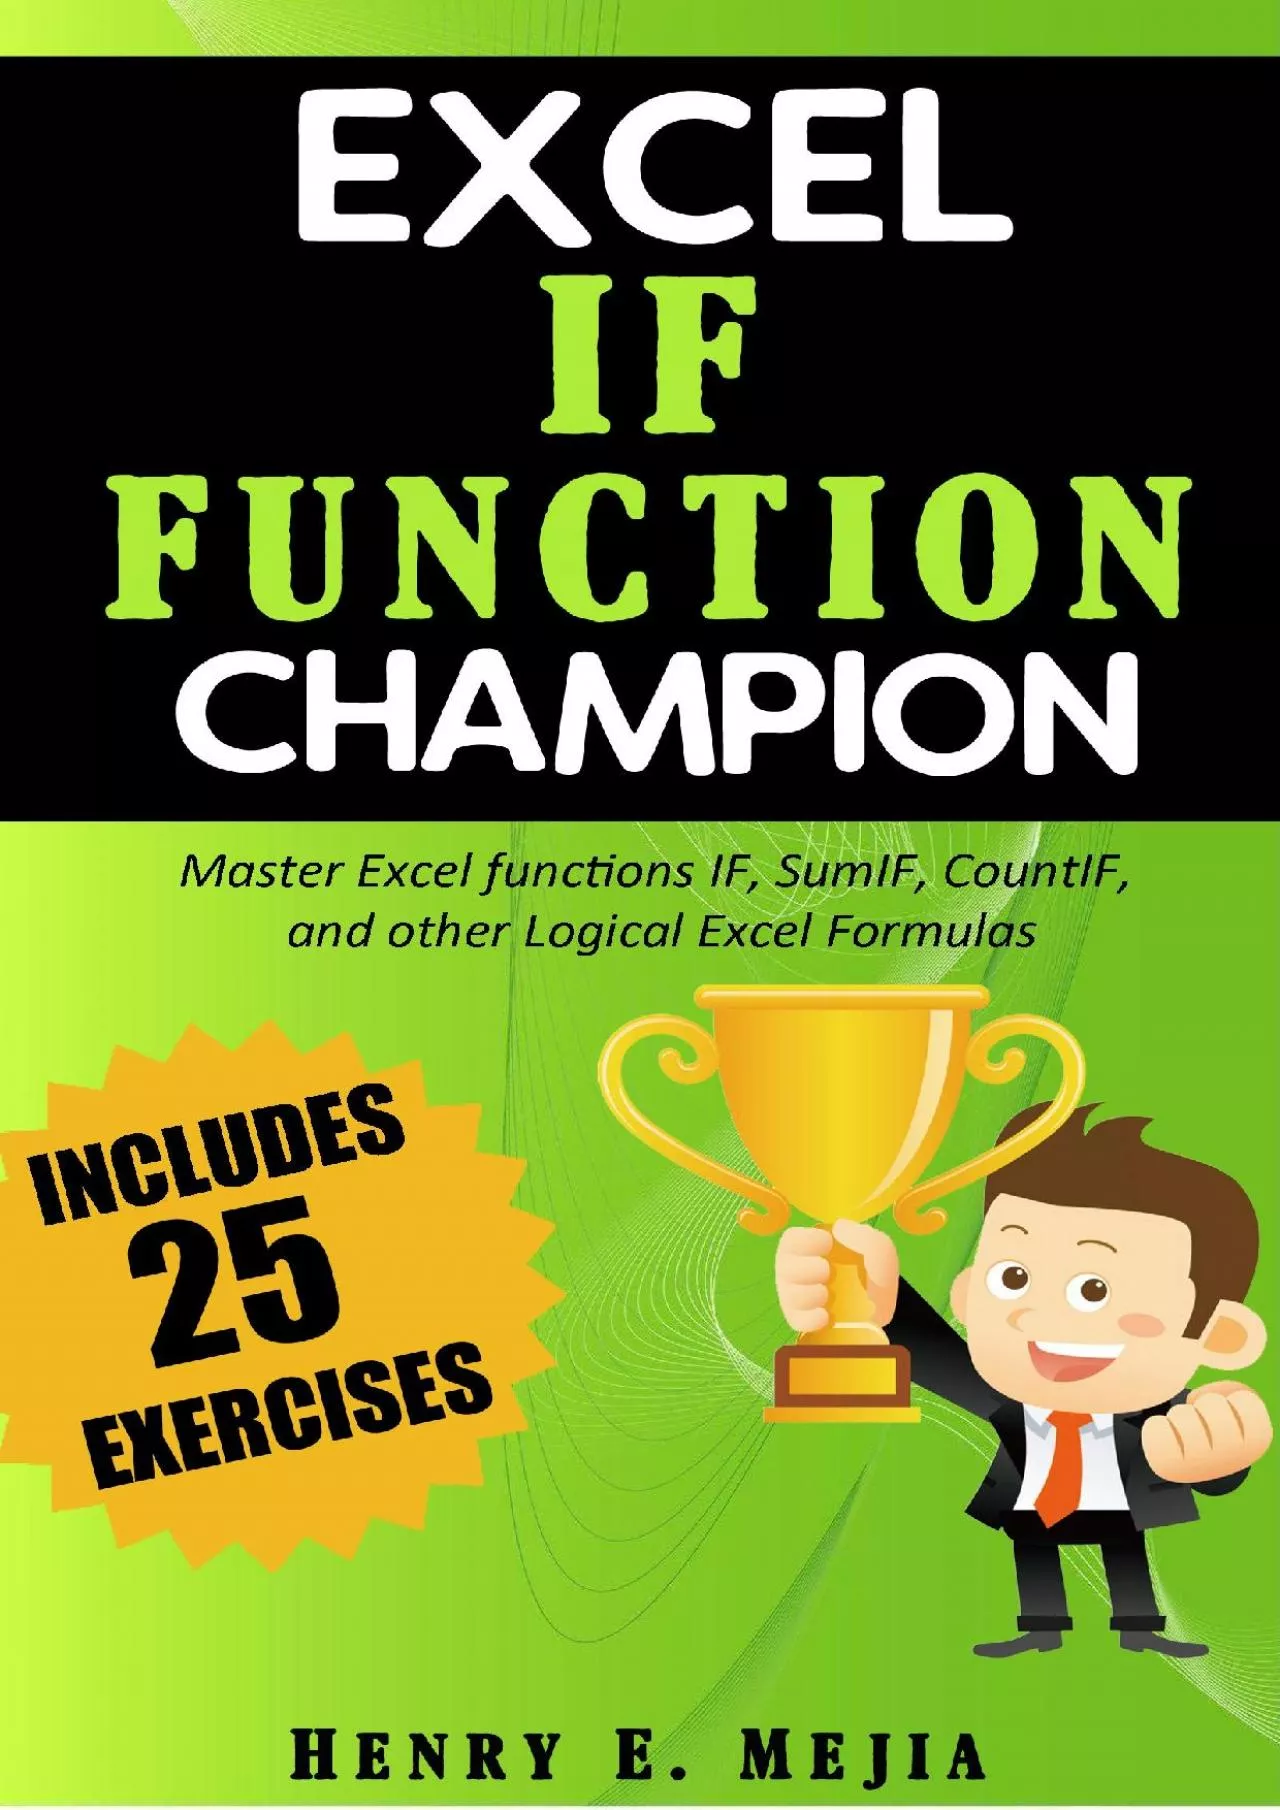 Excel IF Function Champion: Master Excel functions IF, SumIF, CountIF, and other Logical